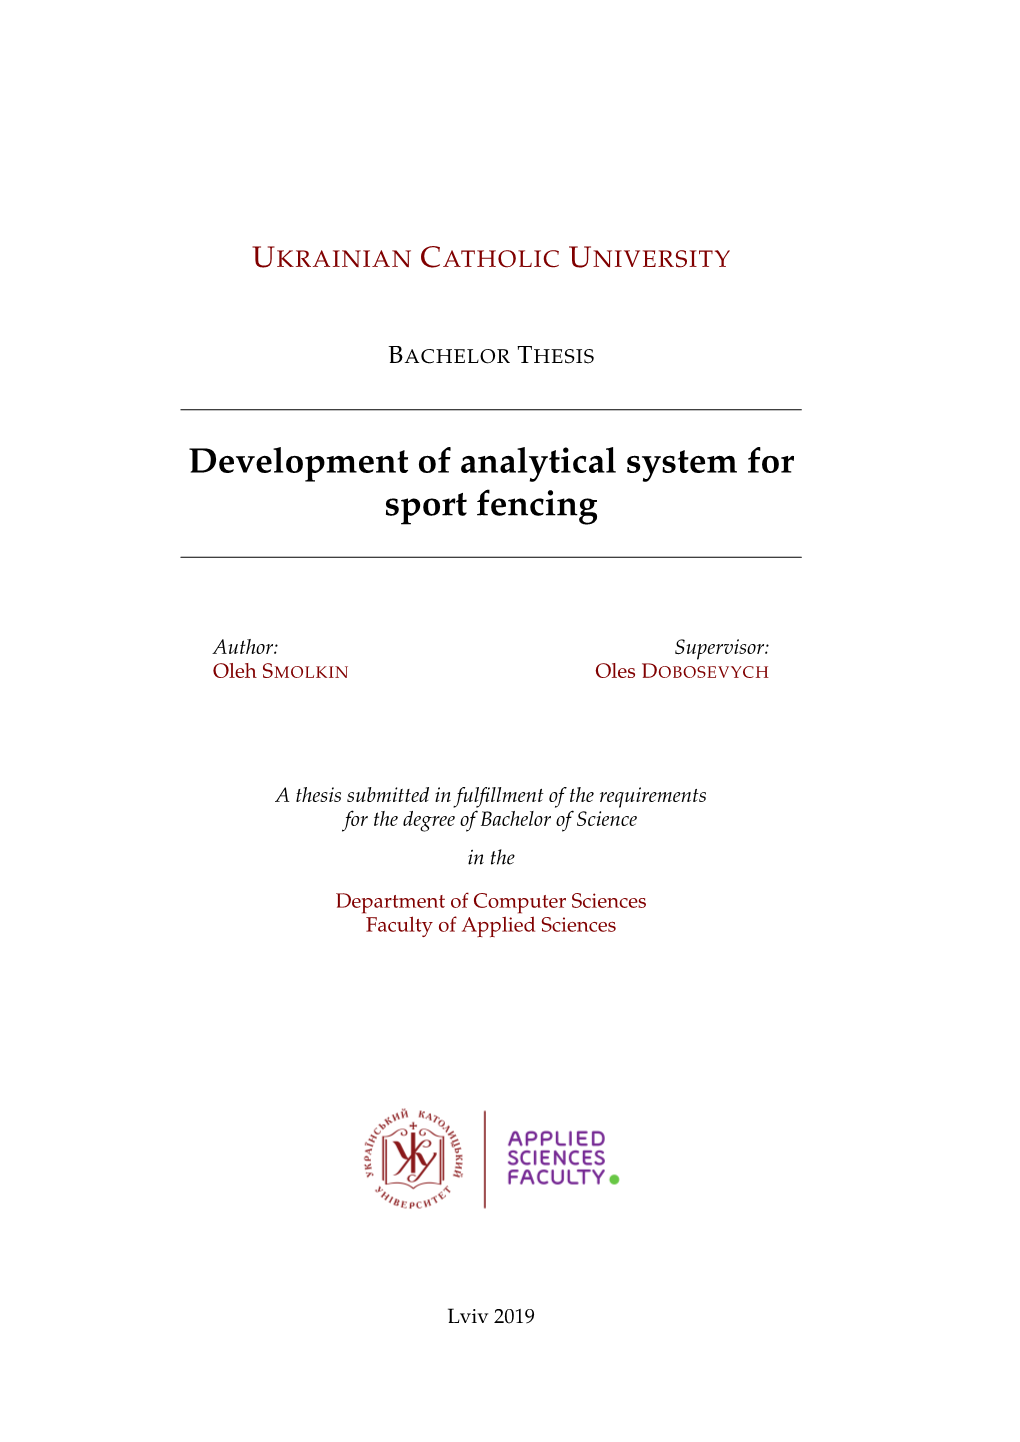 Development of Analytical System for Sport Fencing